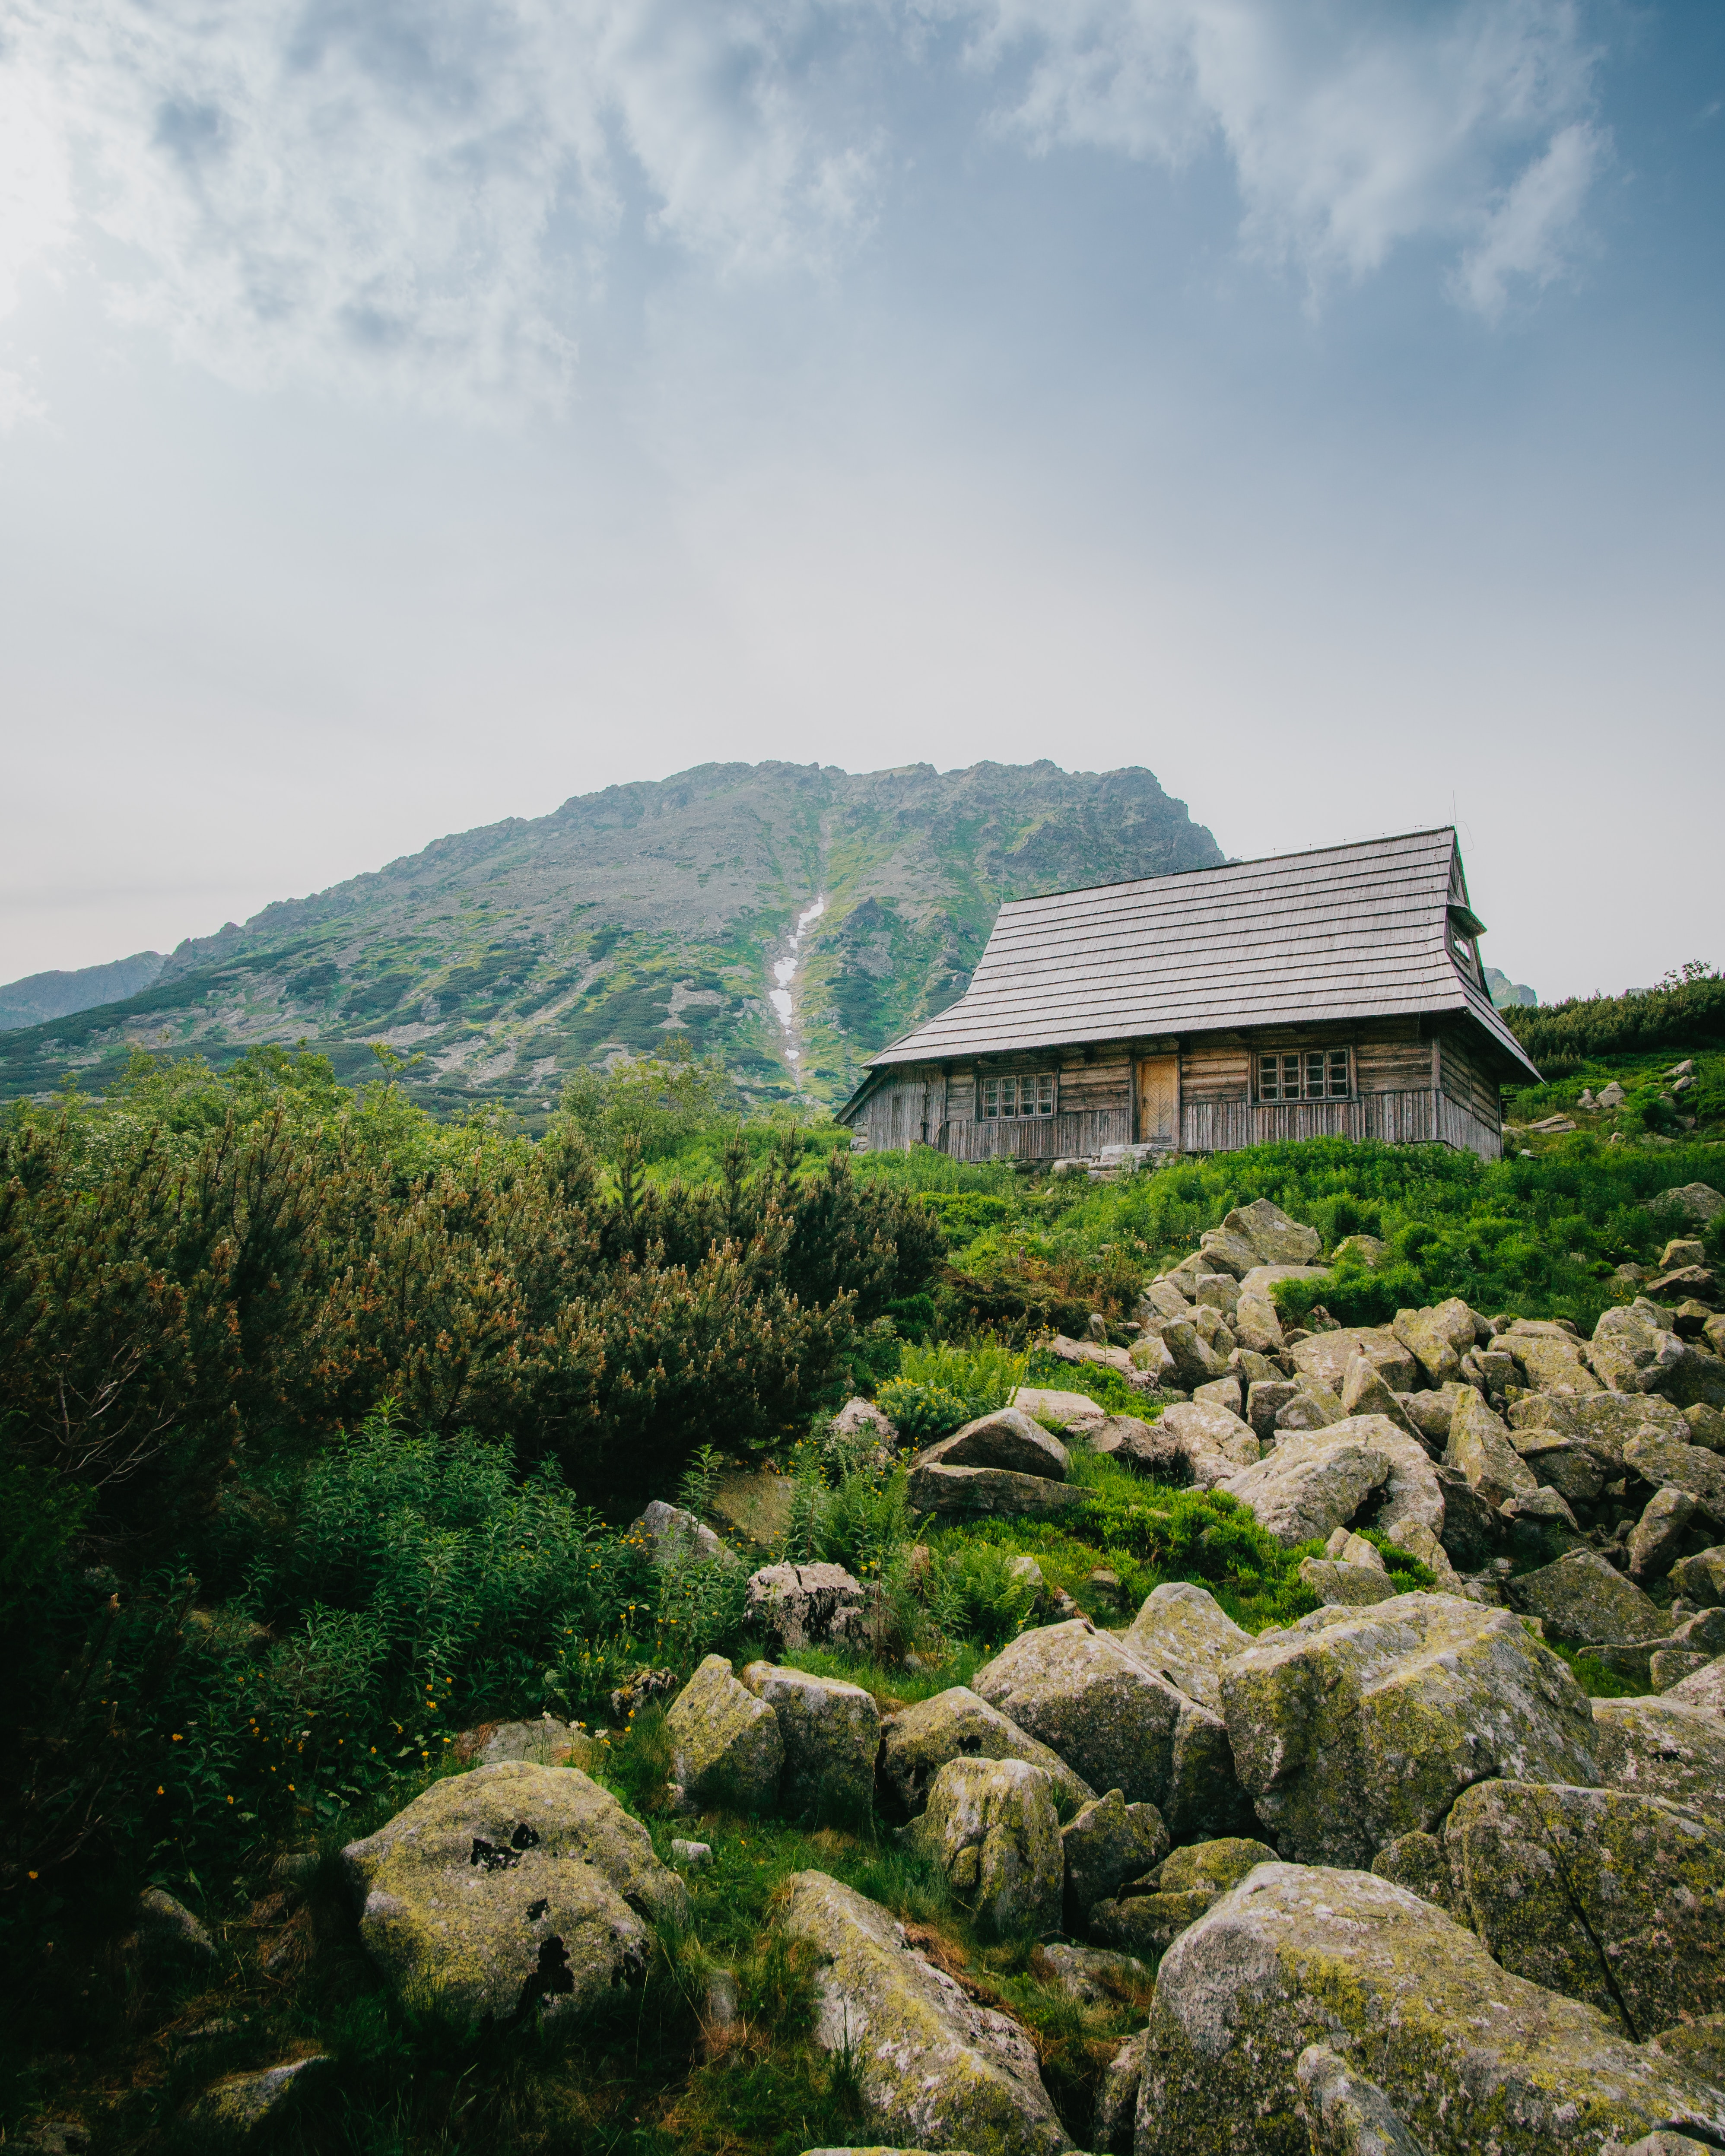 slope, stones, nature, mountains, house